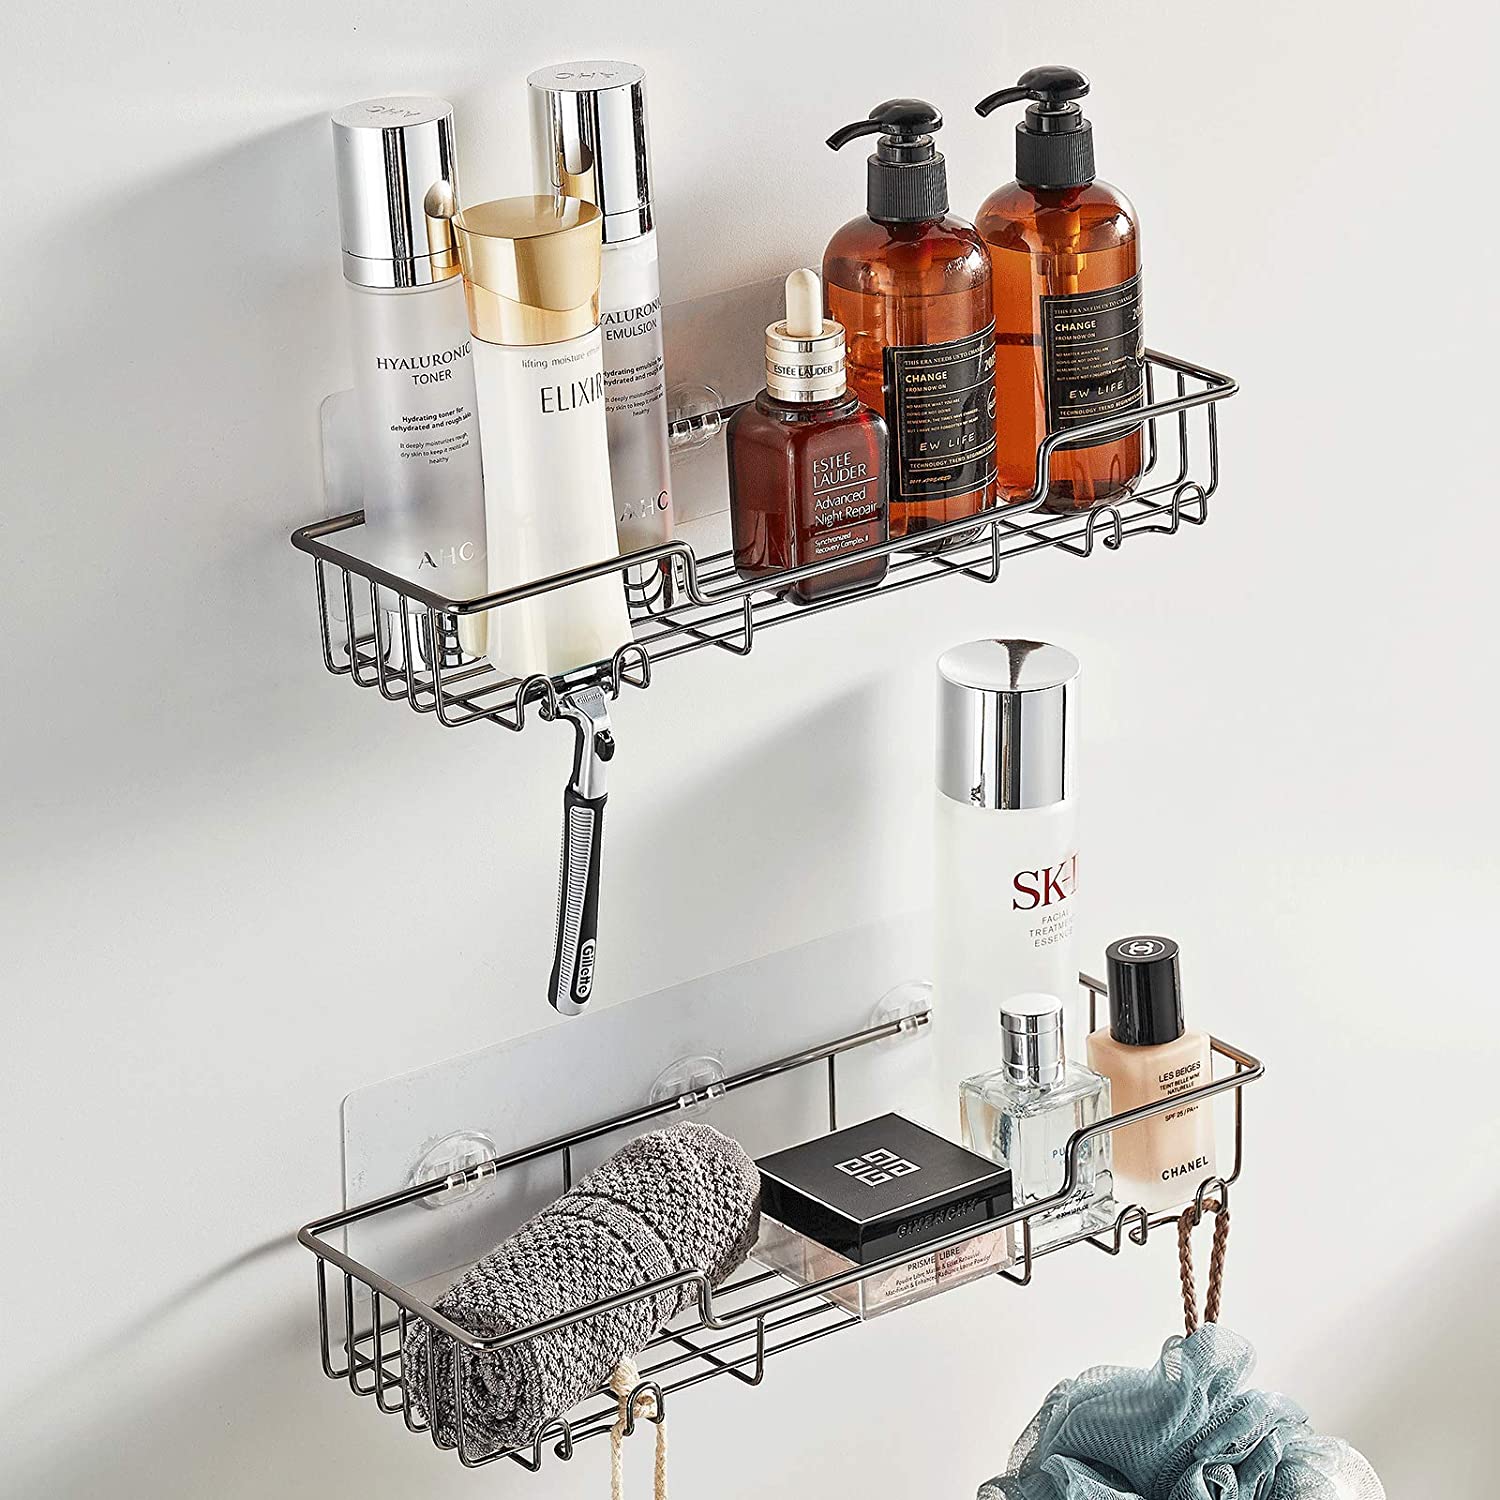  6. BOPai Dill Free Shower Caddy with Good Hooks 